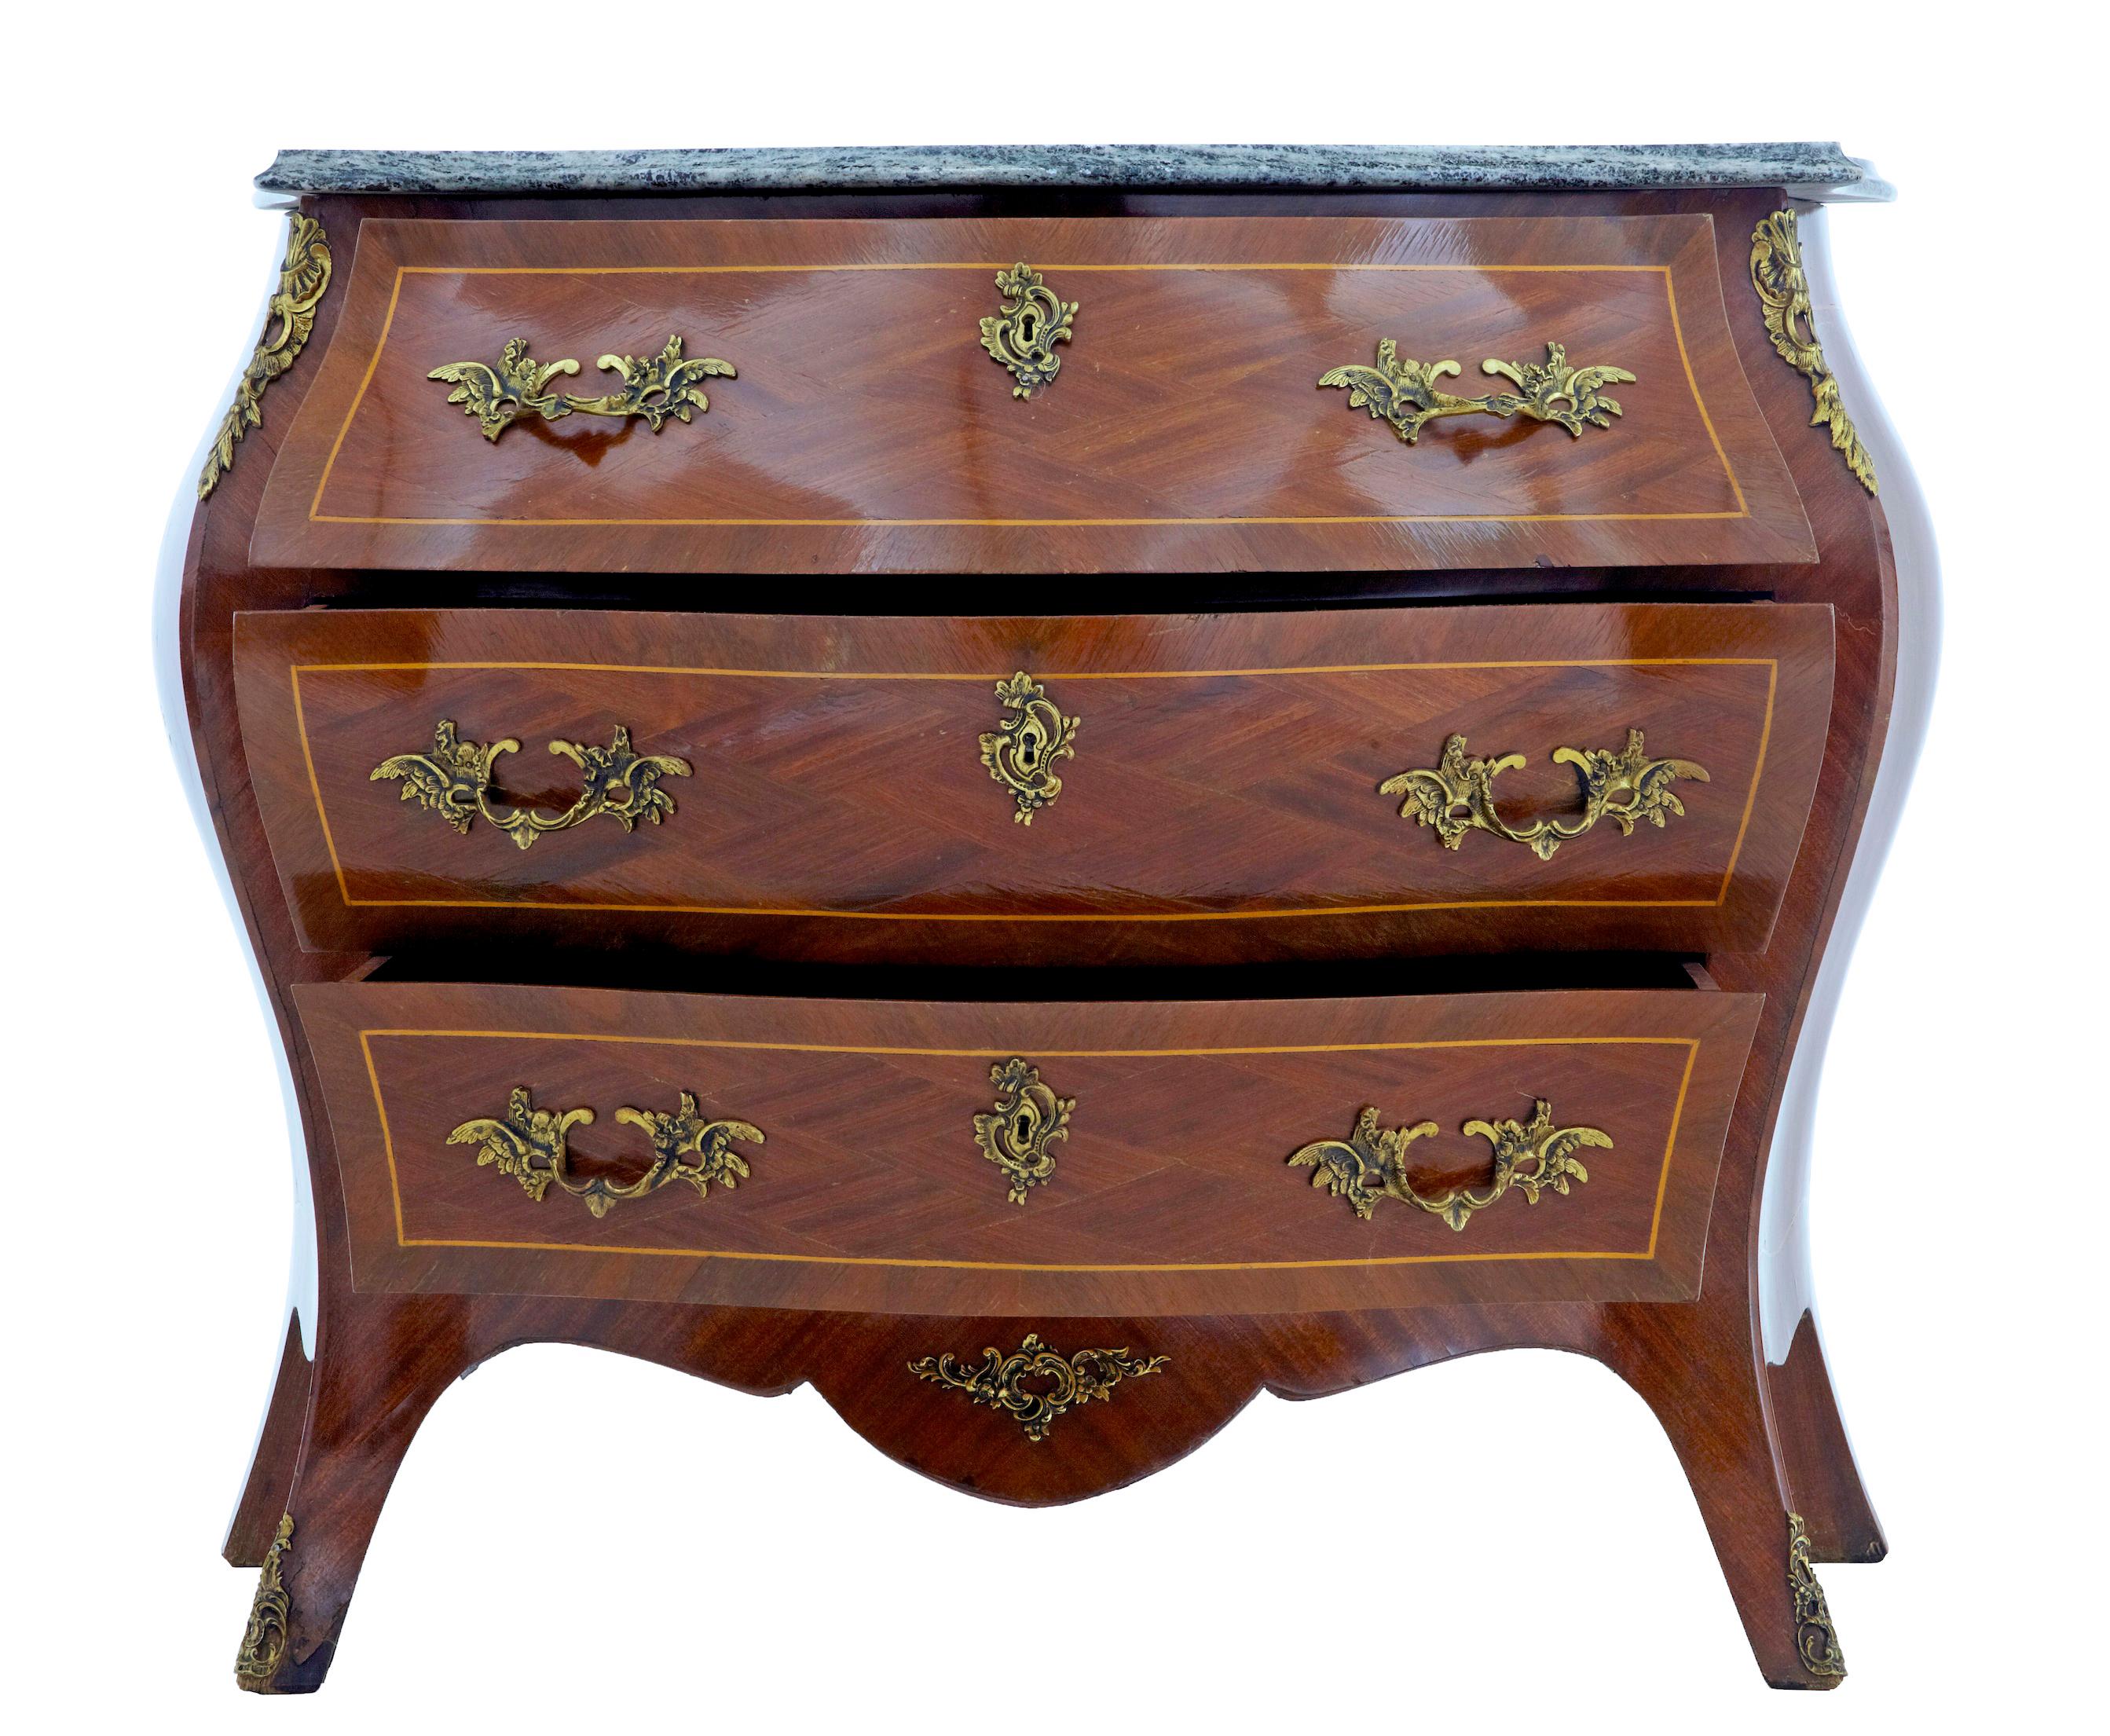 Mid 20th century rococo revival kingwood commode circa 1950.

Bombe shaped 3 drawer commode with shaped marble top. Green and grey marble is loose fitting for easier movement.

Arranged mahogany veneers with stringing and kingwood cross banding.